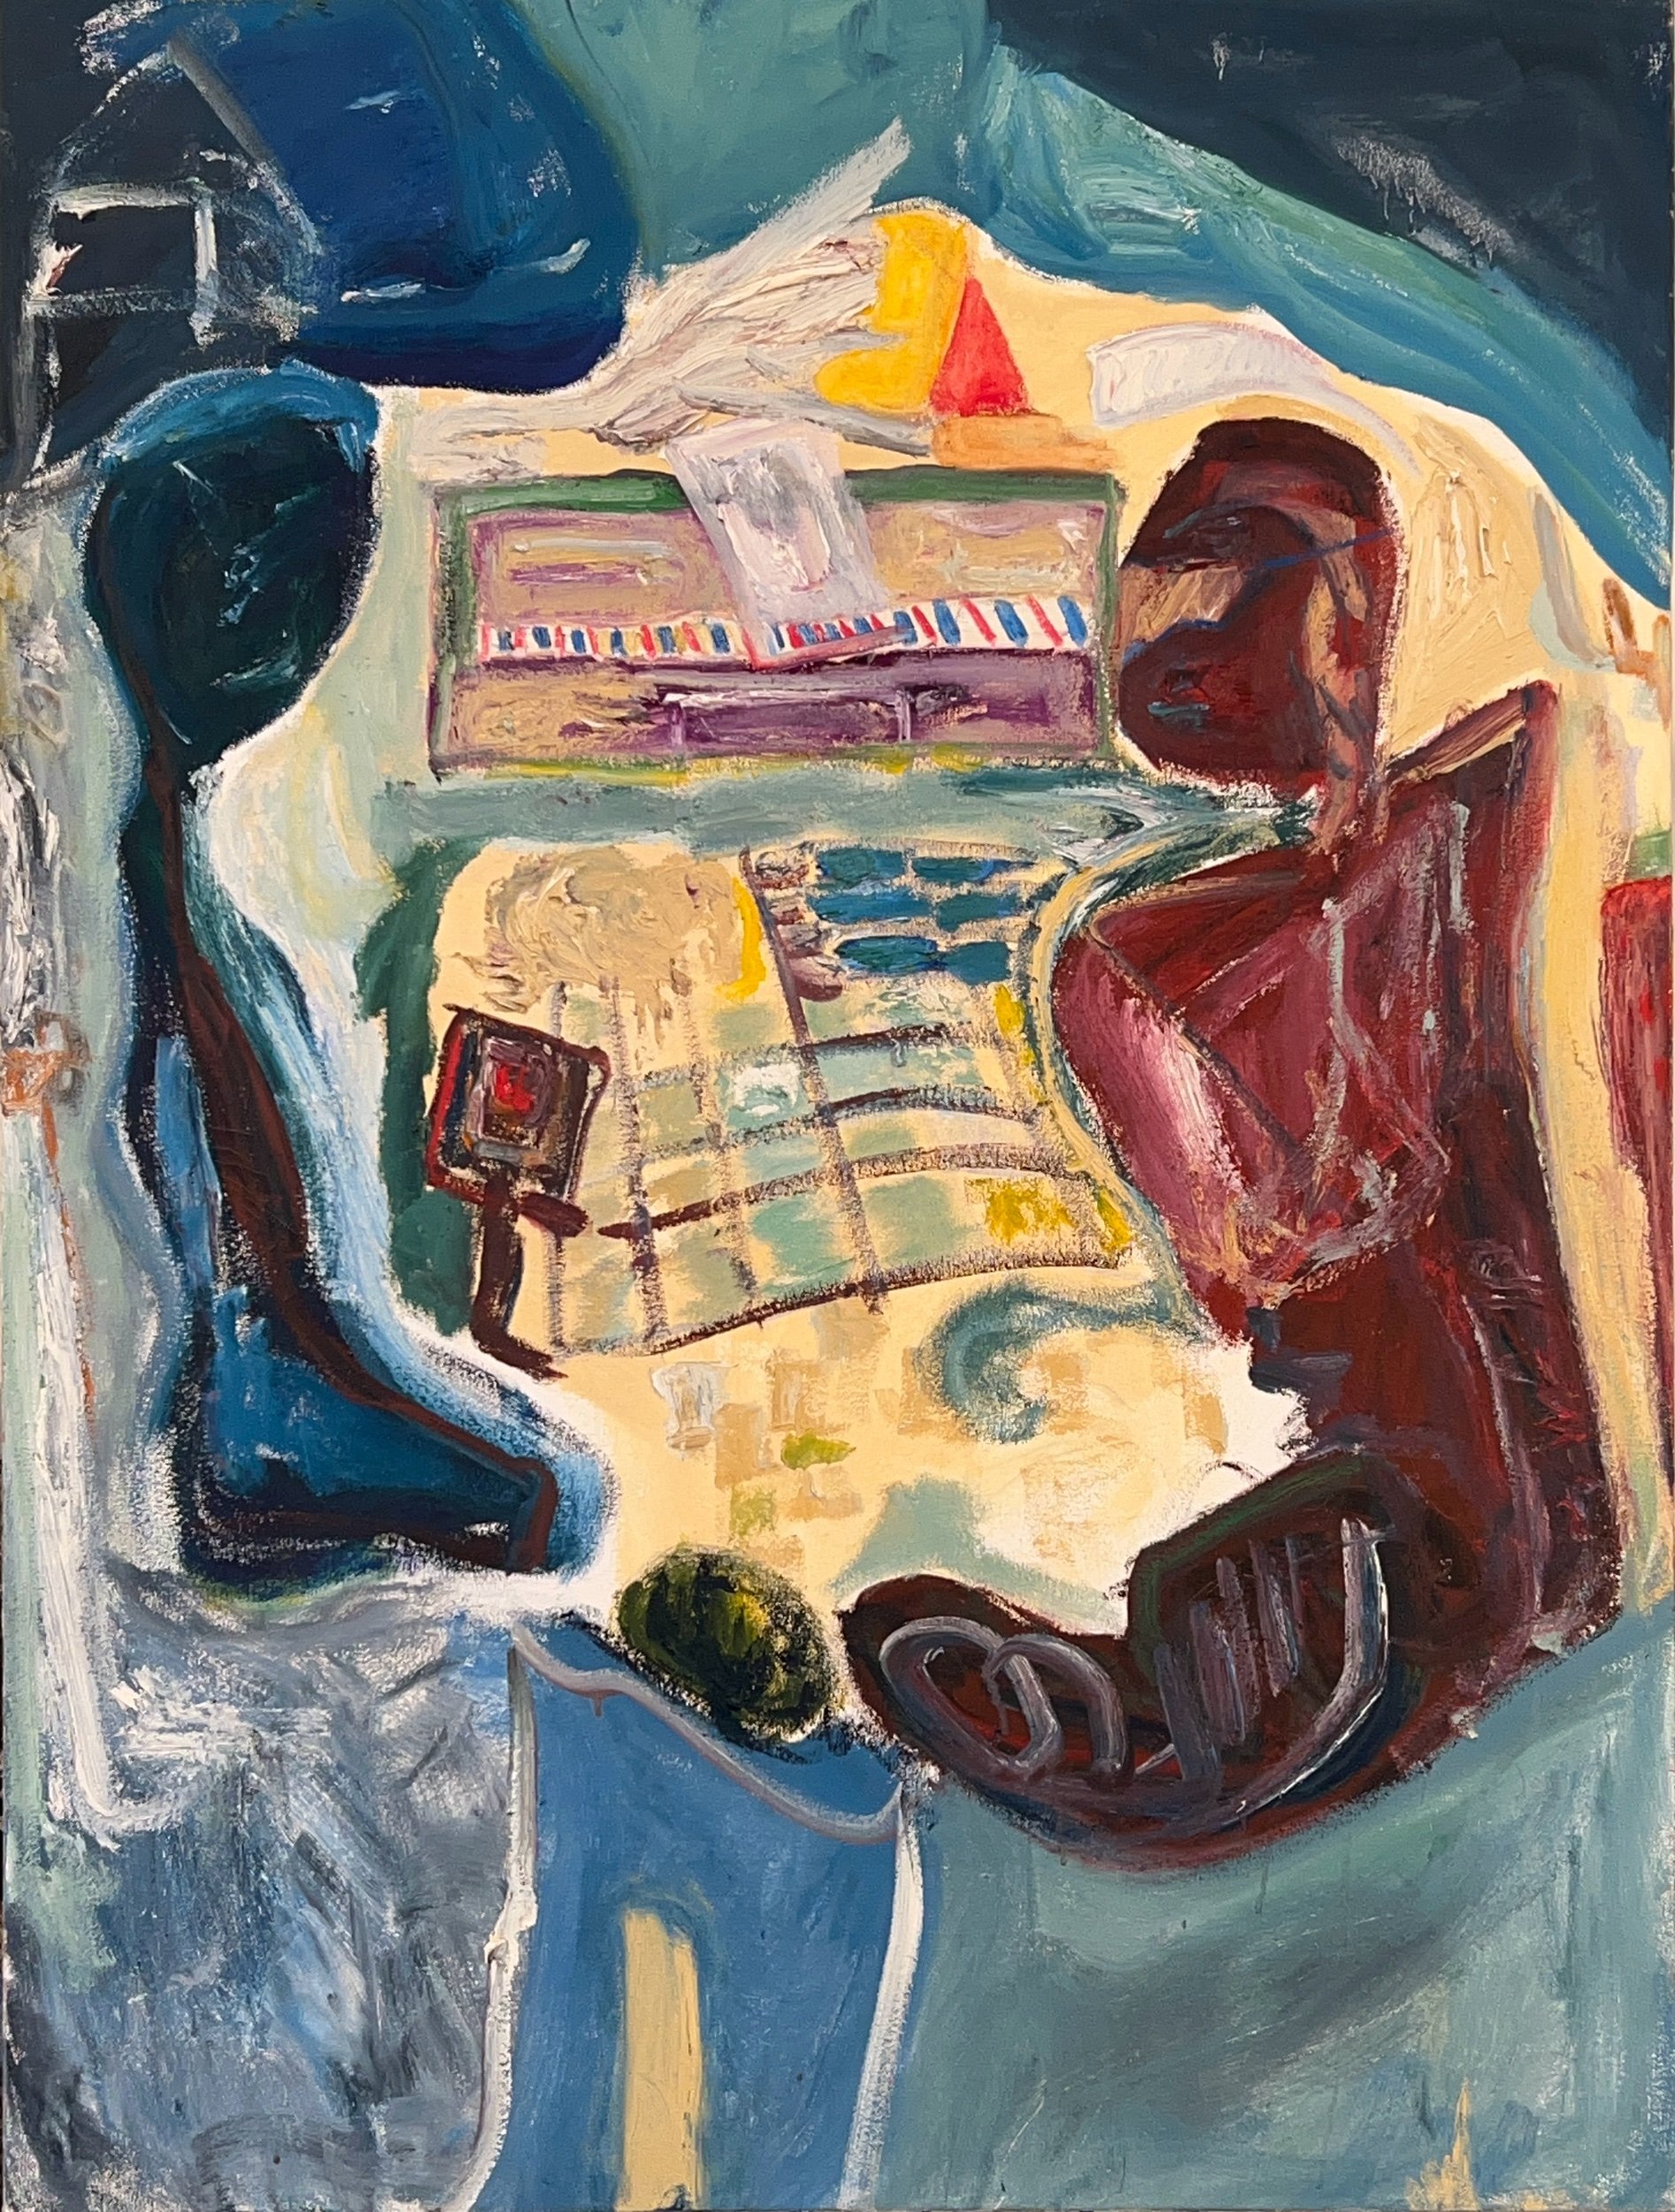 “For Nathan and Kaelie,” Jan 1997, oil on canvas, 48”x36”